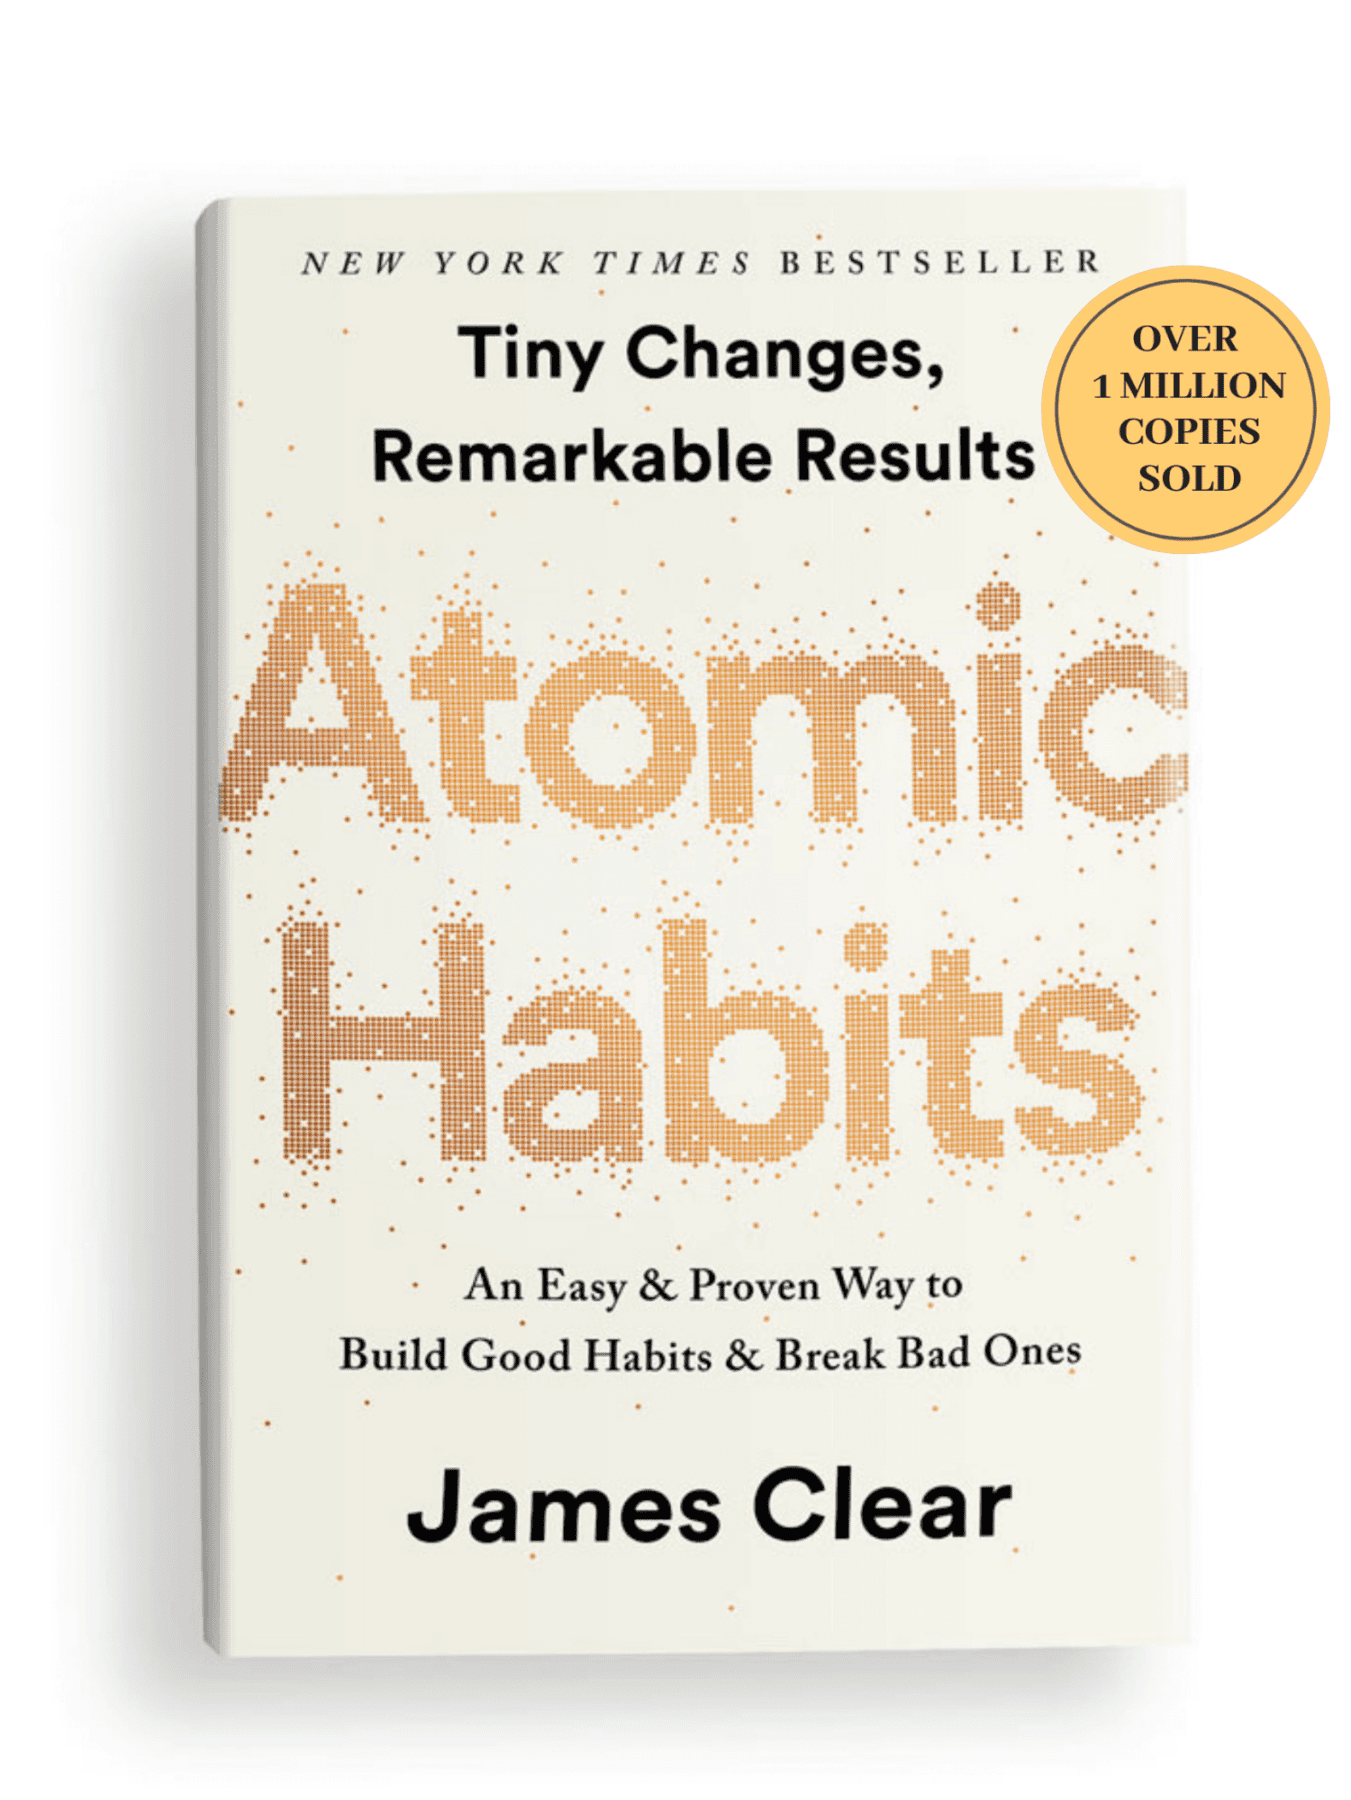 James Clear’s Atomic Habits